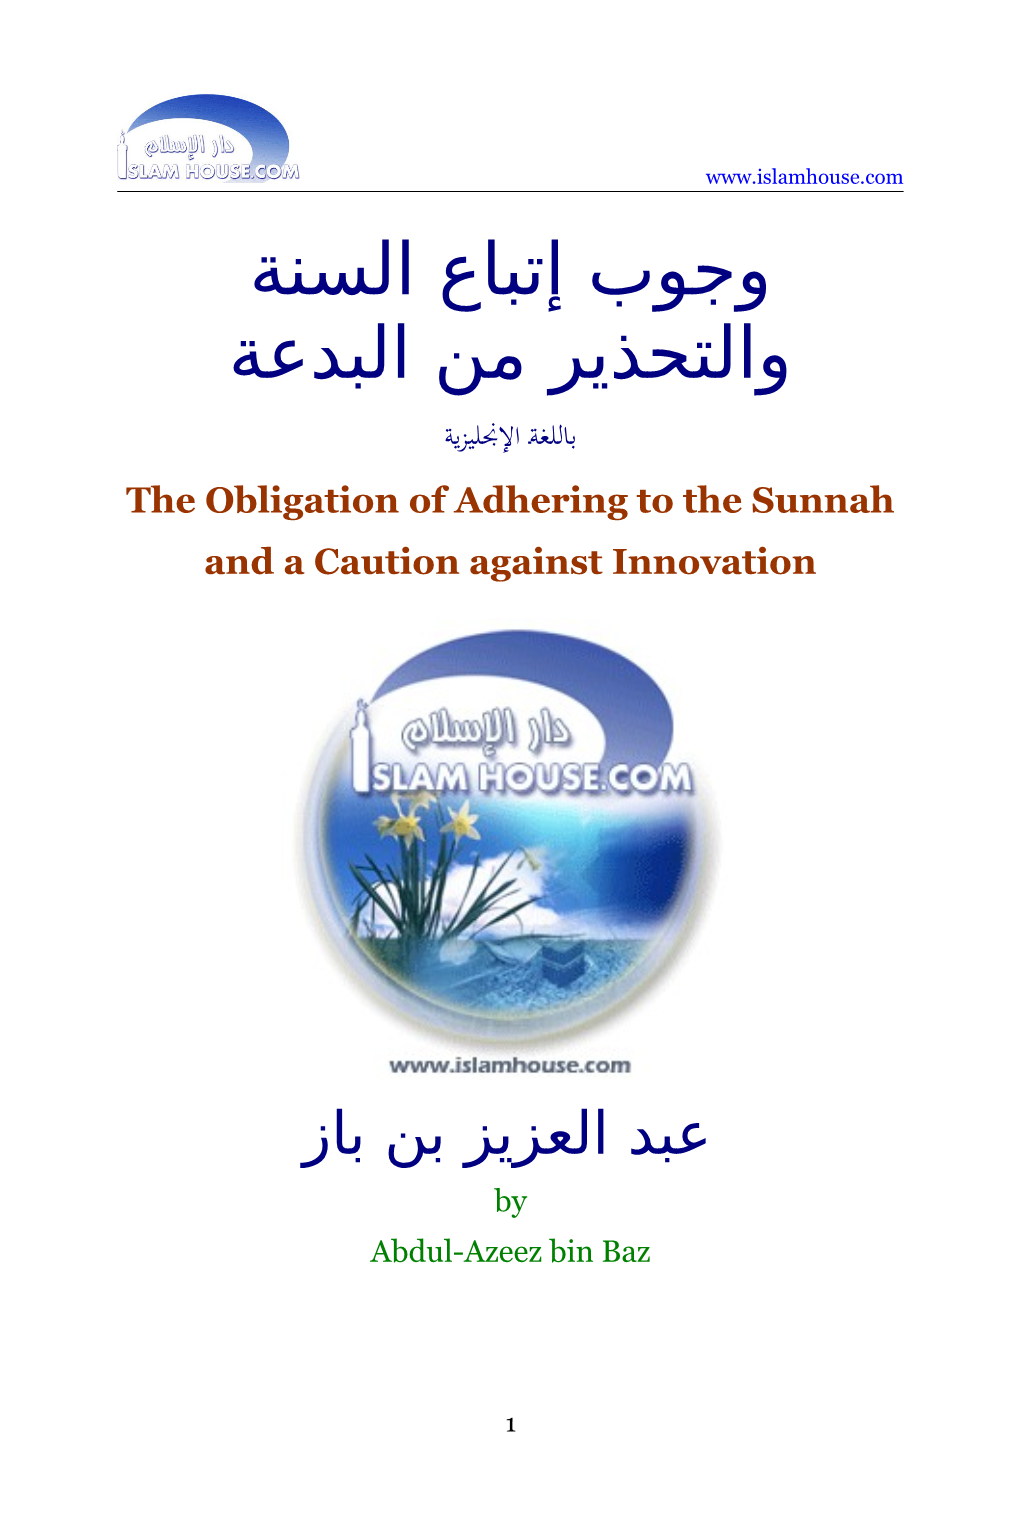 The Obligation of Adhering to the Sunnah and a Caution Against Innovation